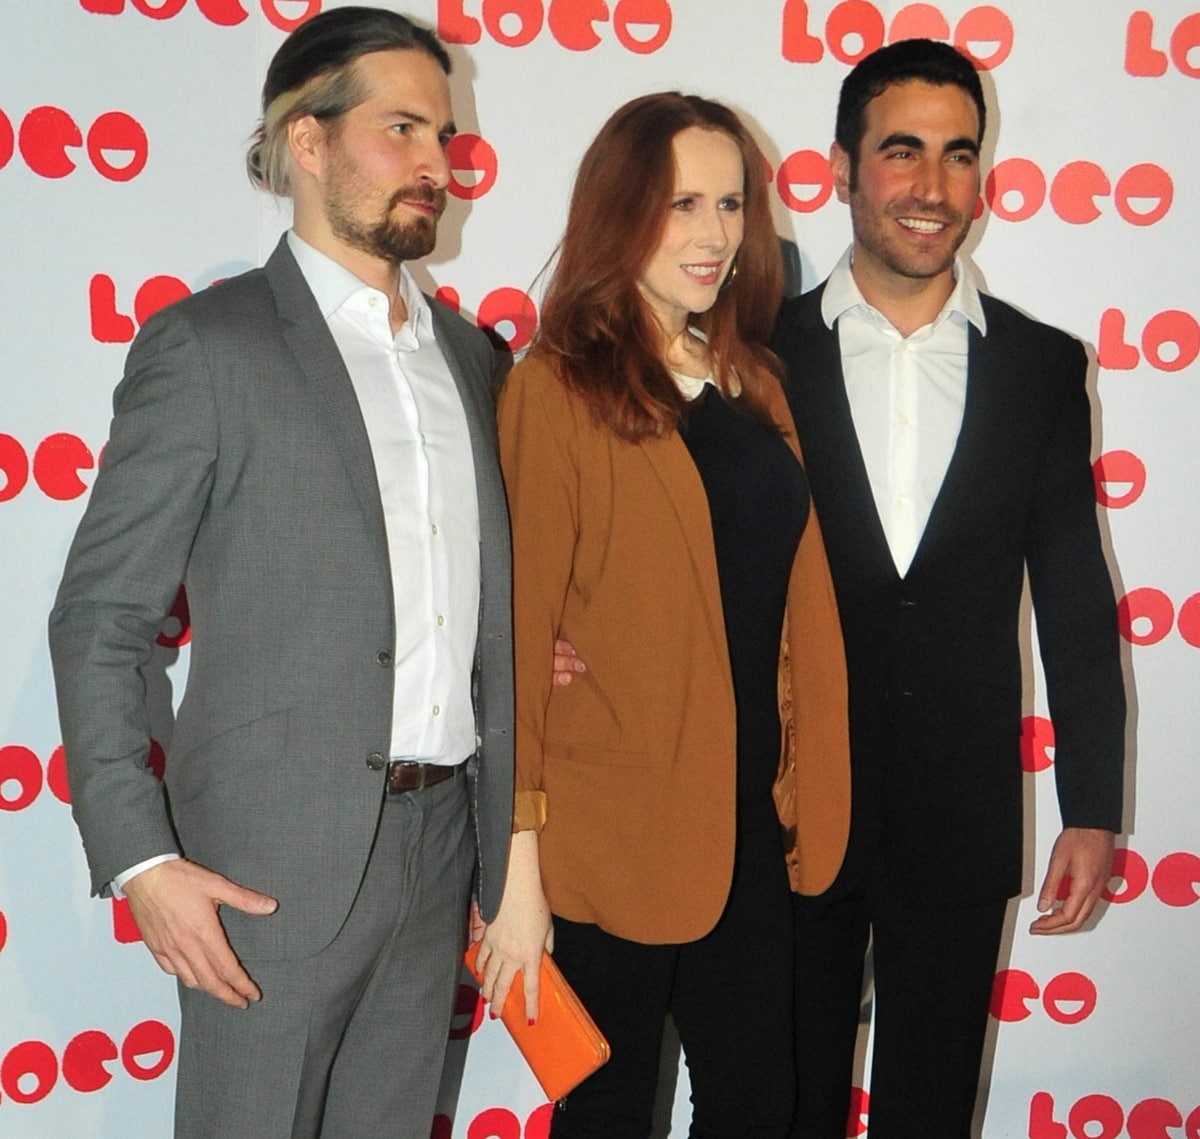 Jon Drever, Catherine Tate, and Brett Goldstein at the premiere of SuperBob during LOCO Film Festival